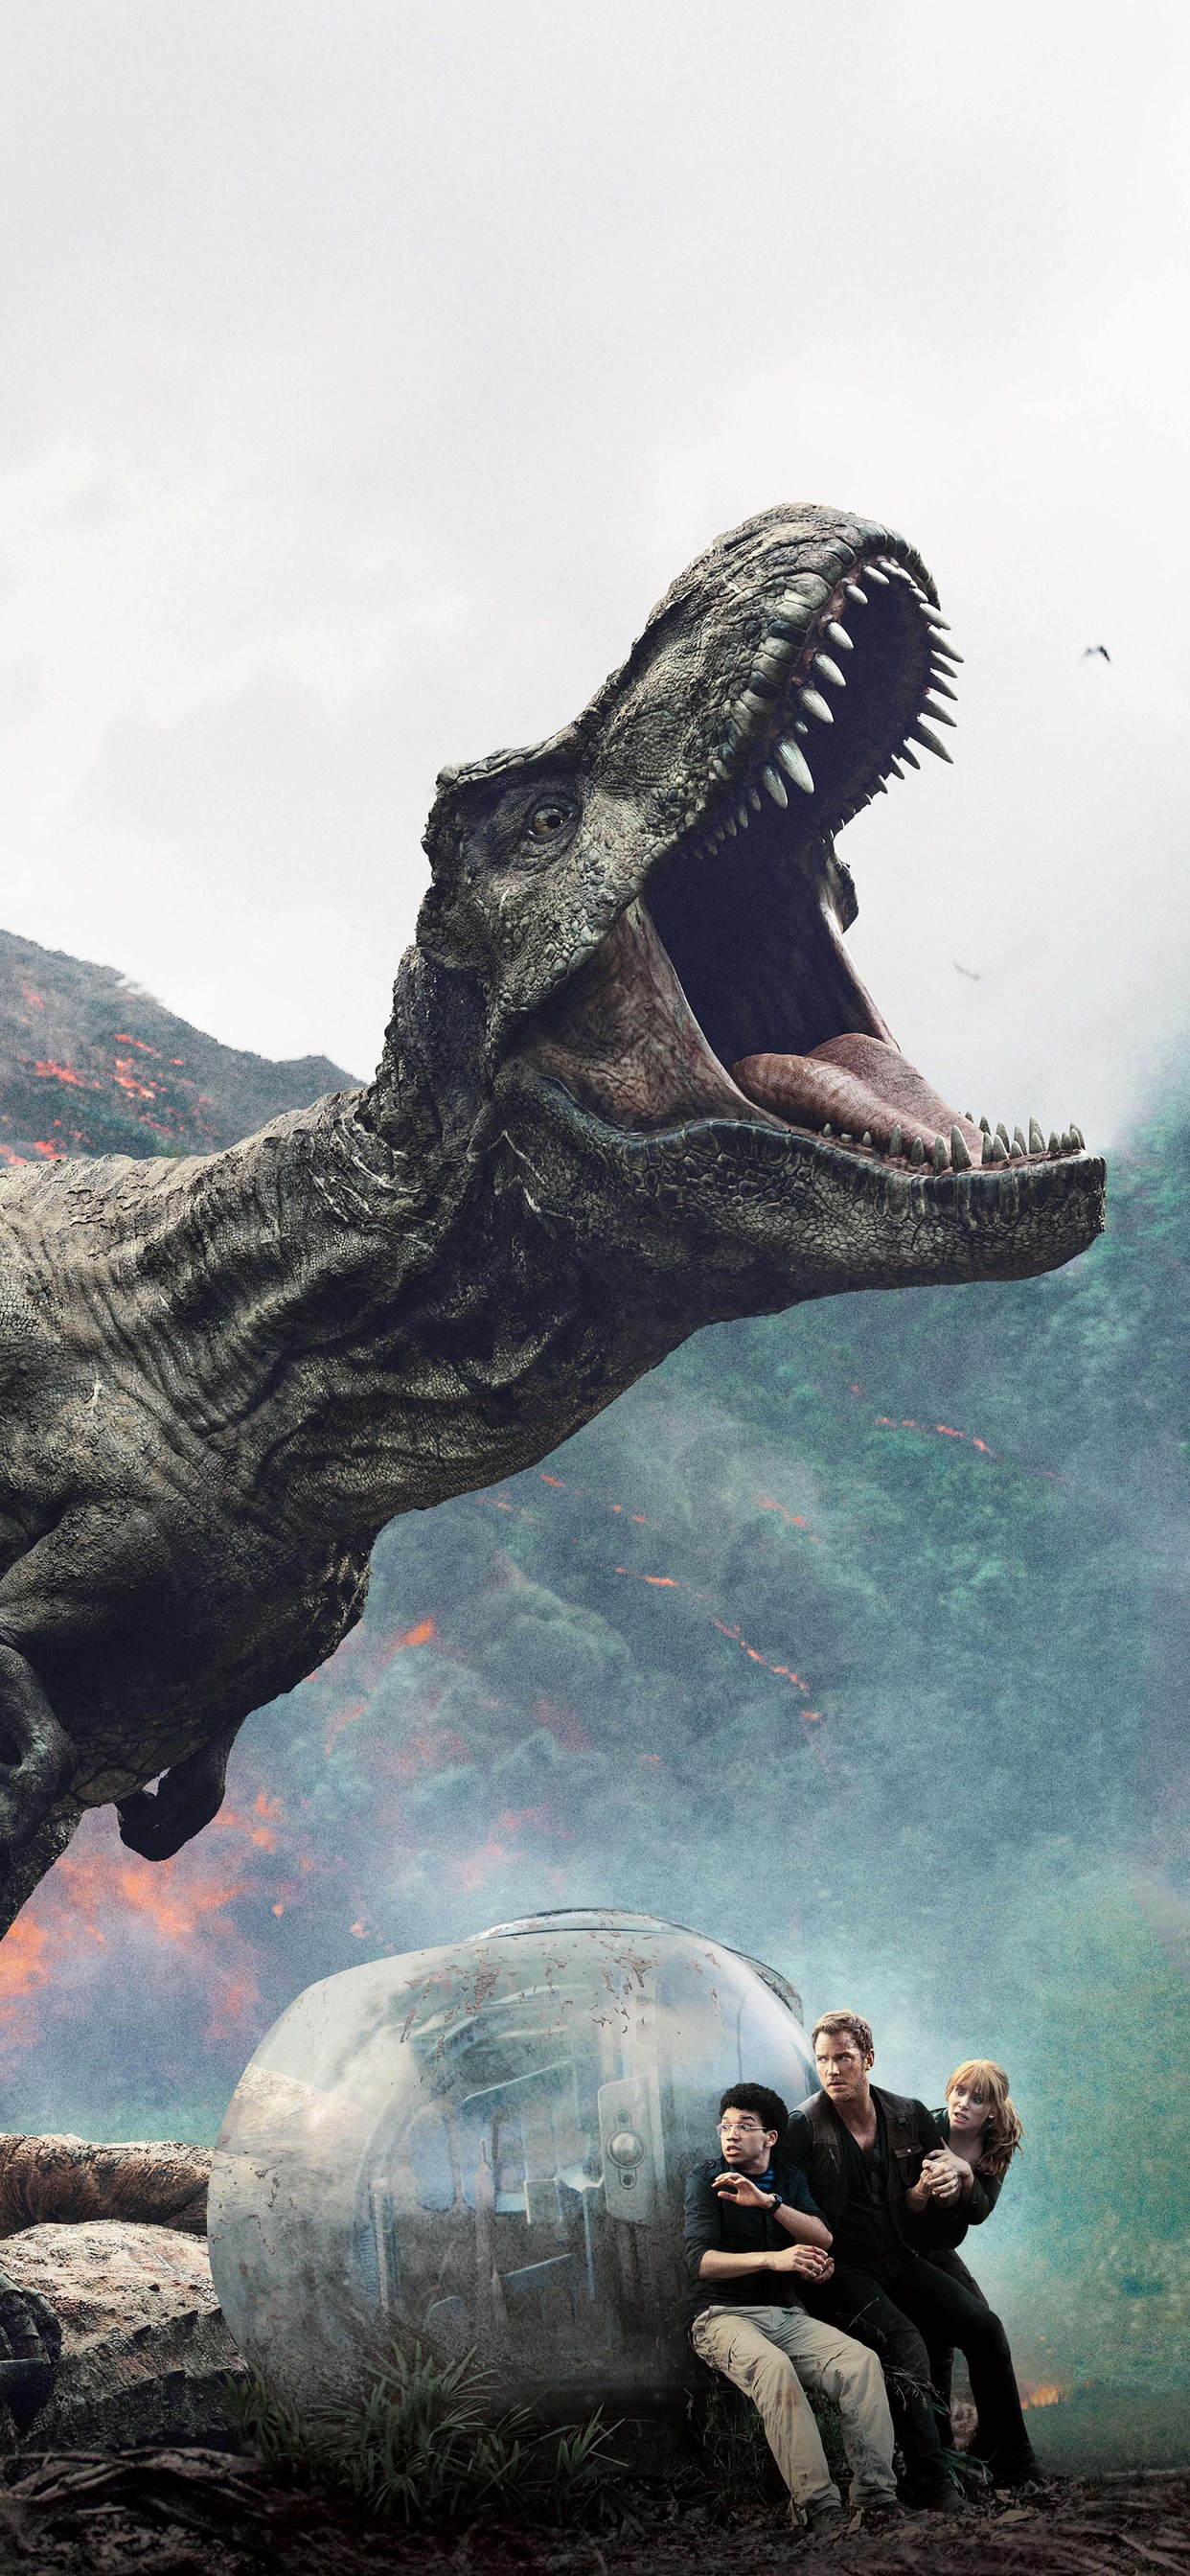 1242x26 Jurassic World Fallen Kingdom 12k International Poster Iphone Xs Max Hd 4k Wallpapers Images Backgrounds Photos And Pictures